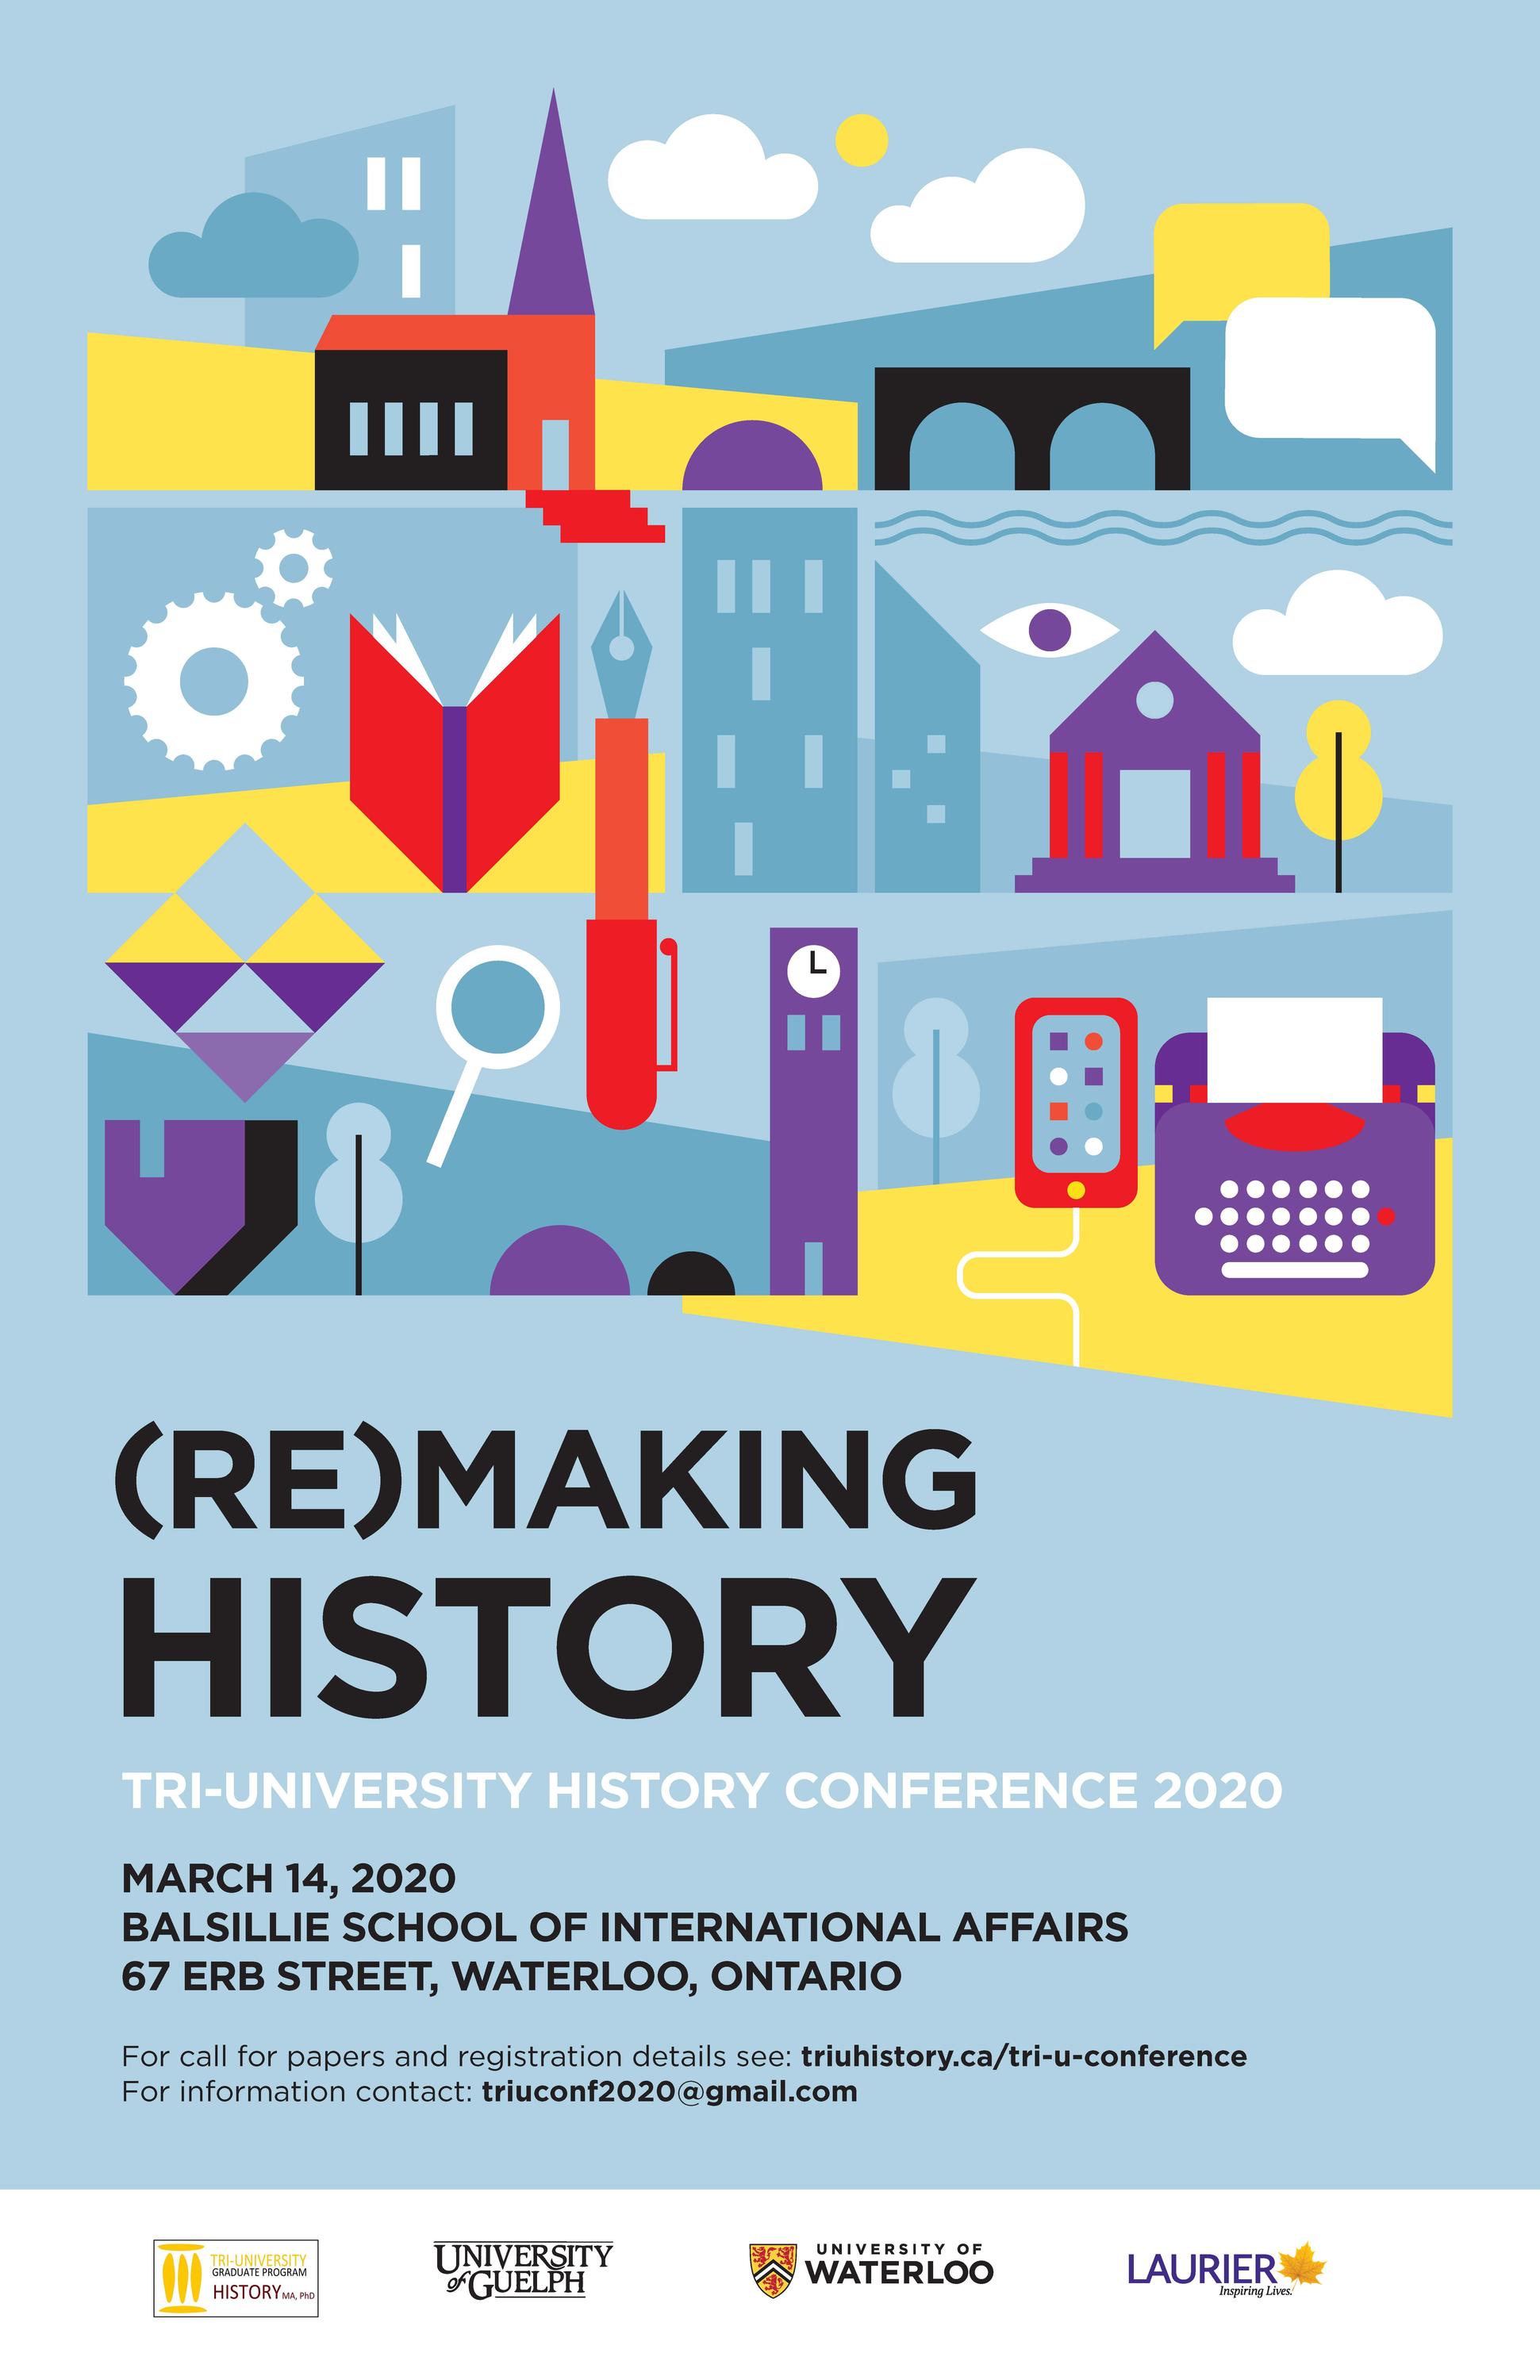 Remaking history poster of stylized buildings, writing instruments, technology